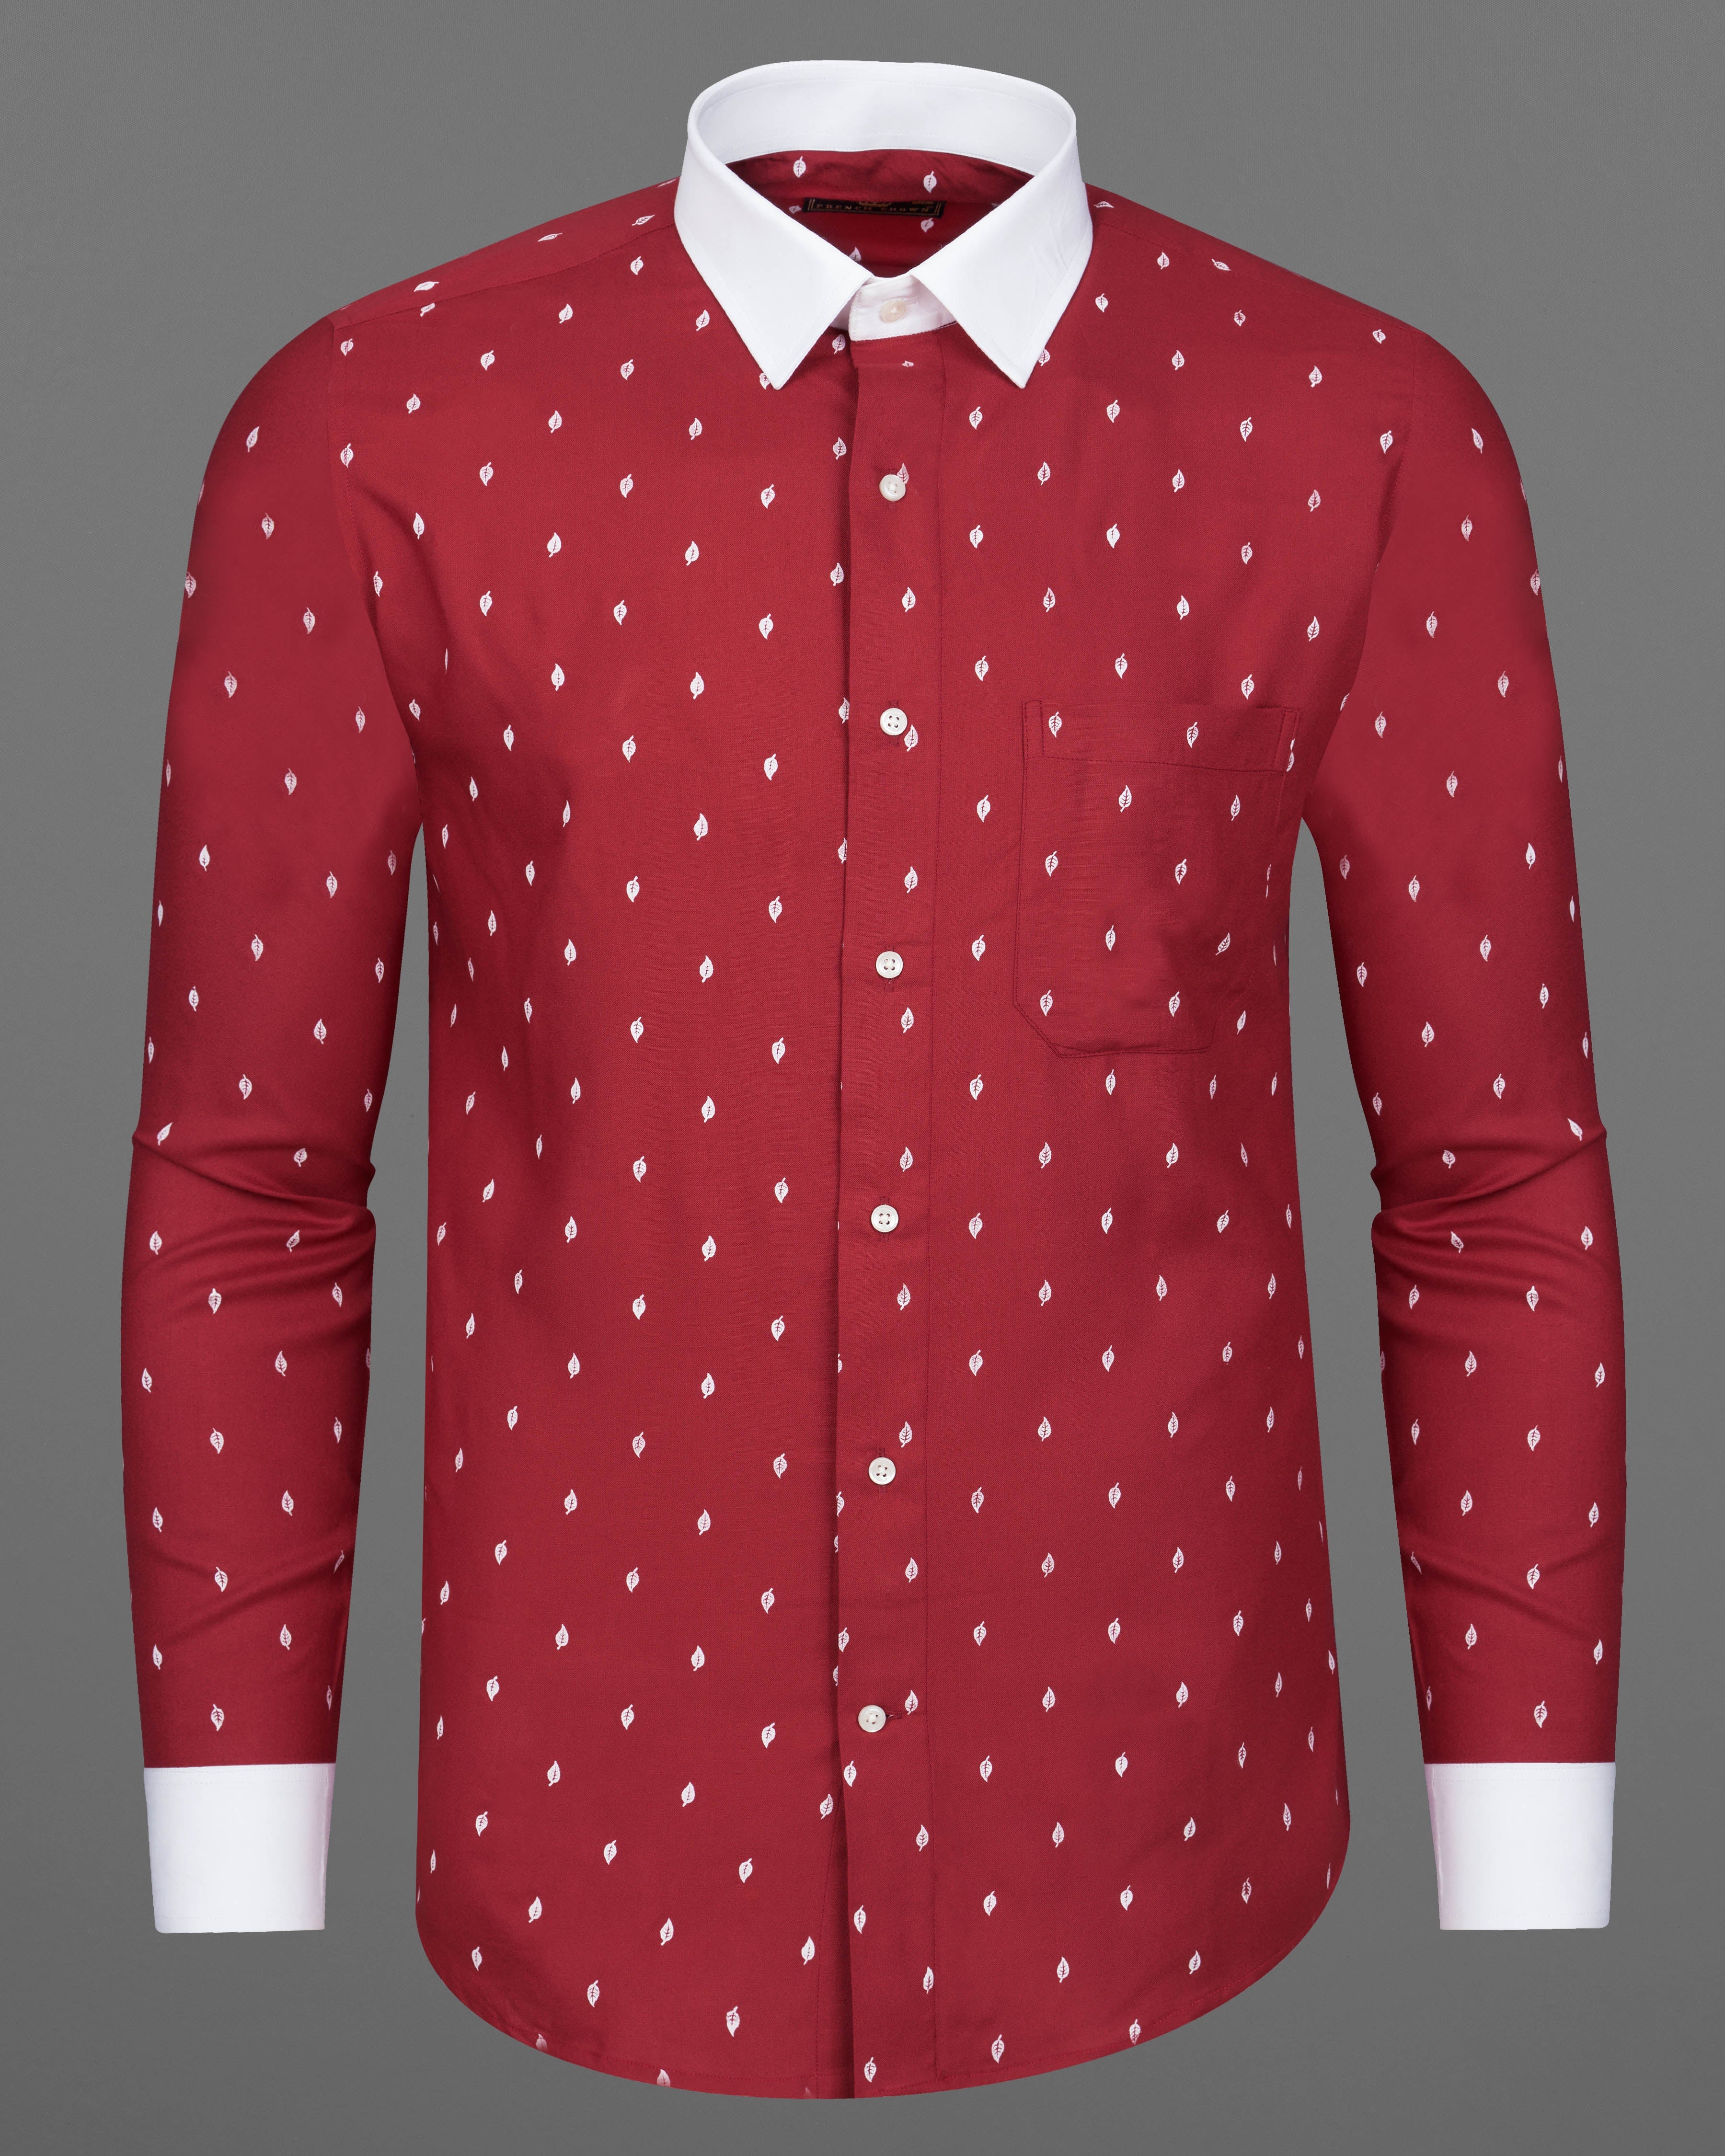 Merlot Red and White Leaves Textured Tencel Shirt 9307-WCC-38,9307-WCC-H-38,9307-WCC-39,9307-WCC-H-39,9307-WCC-40,9307-WCC-H-40,9307-WCC-42,9307-WCC-H-42,9307-WCC-44,9307-WCC-H-44,9307-WCC-46,9307-WCC-H-46,9307-WCC-48,9307-WCC-H-48,9307-WCC-50,9307-WCC-H-50,9307-WCC-52,9307-WCC-H-52